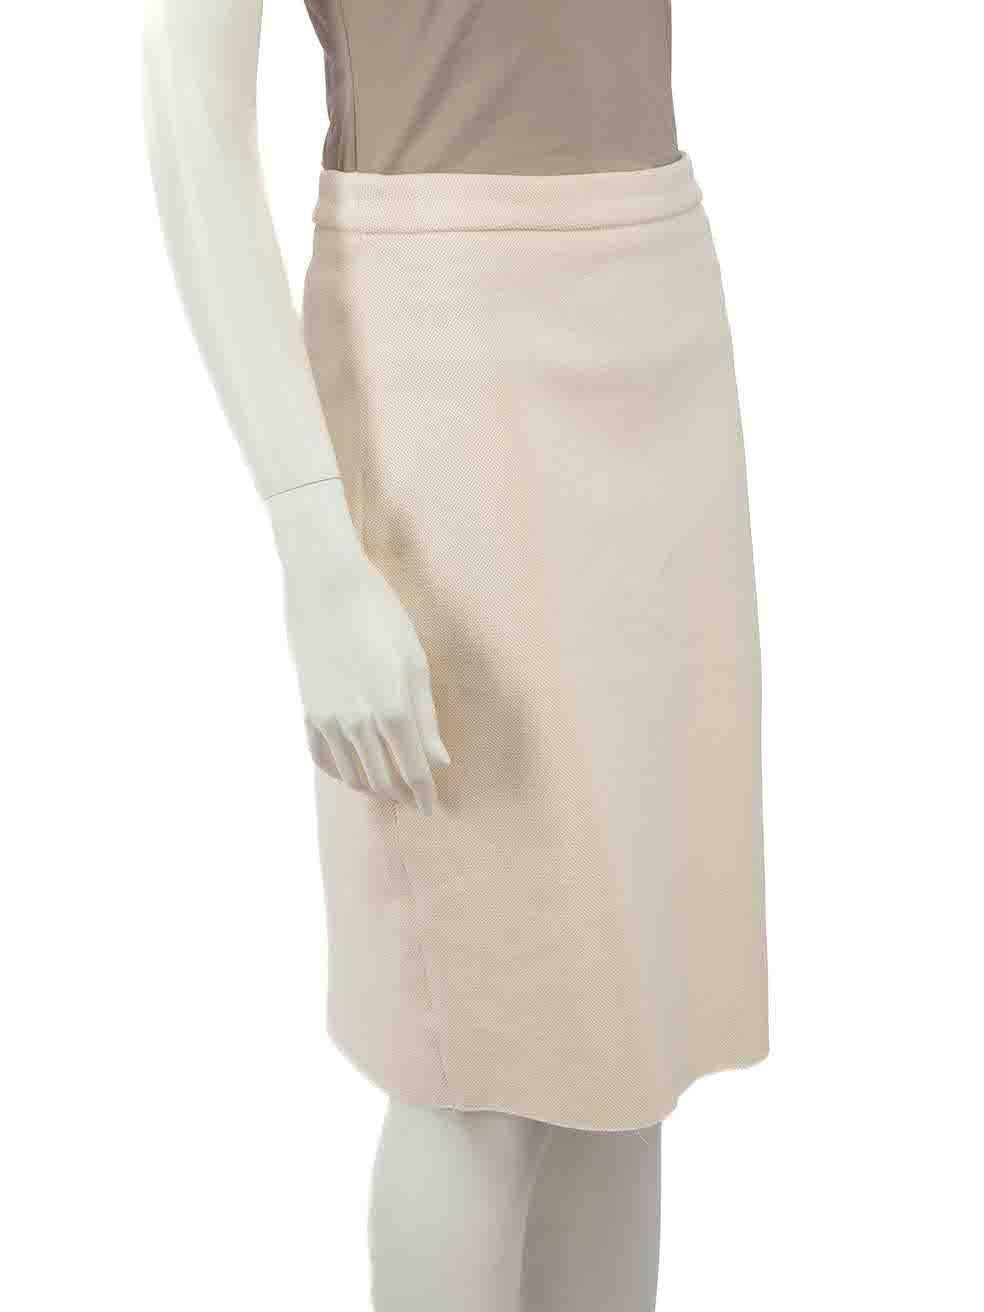 CONDITION is Very good. Hardly any visible wear to skirt is evident on this used Lanvin designer resale item.
 
 
 
 Details
 
 
 Cream
 
 Cotton
 
 Pencil skirt
 
 Back open ended double zip fastening
 
 Figure hugging fit
 
 Stretchy
 
 
 
 
 
